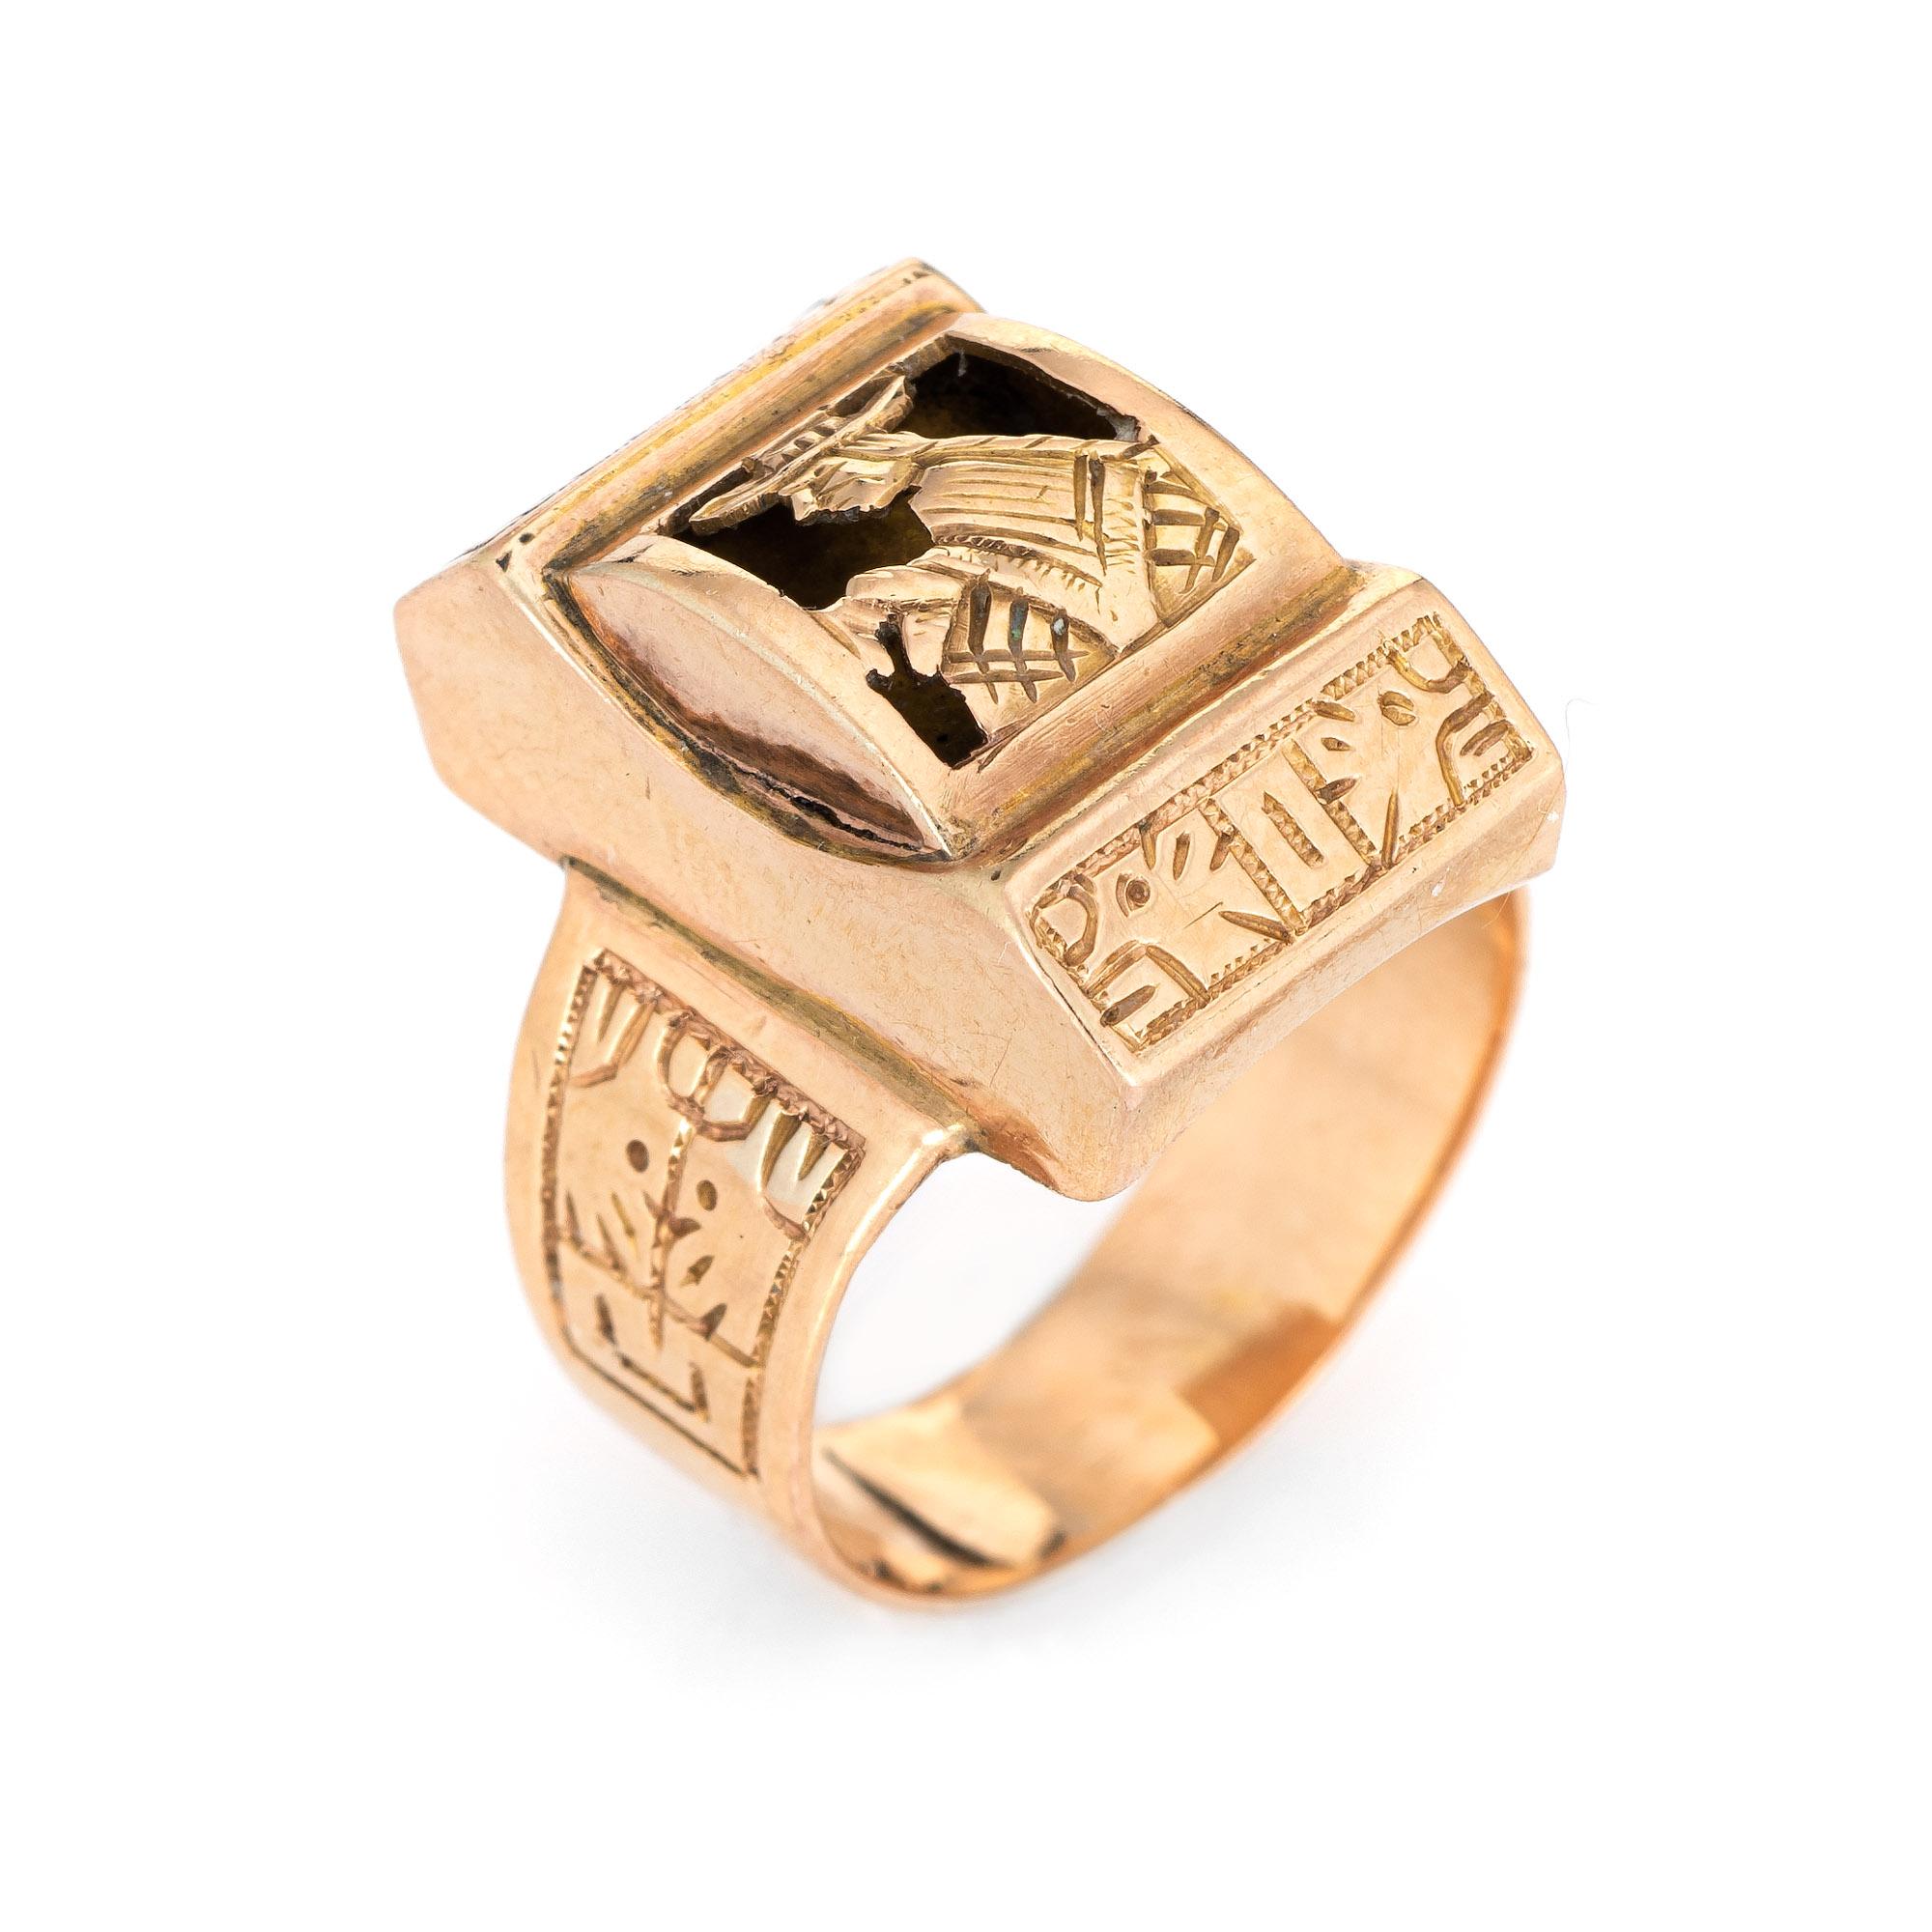 Finely detailed vintage Aztec ring crafted in 18 karat rose gold. 

The ring features a low dome mount with a cut out figure dressed in a hat and shoulder cape. The side shoulders feature etched details of what appear to be animals. Aztec jewelry is